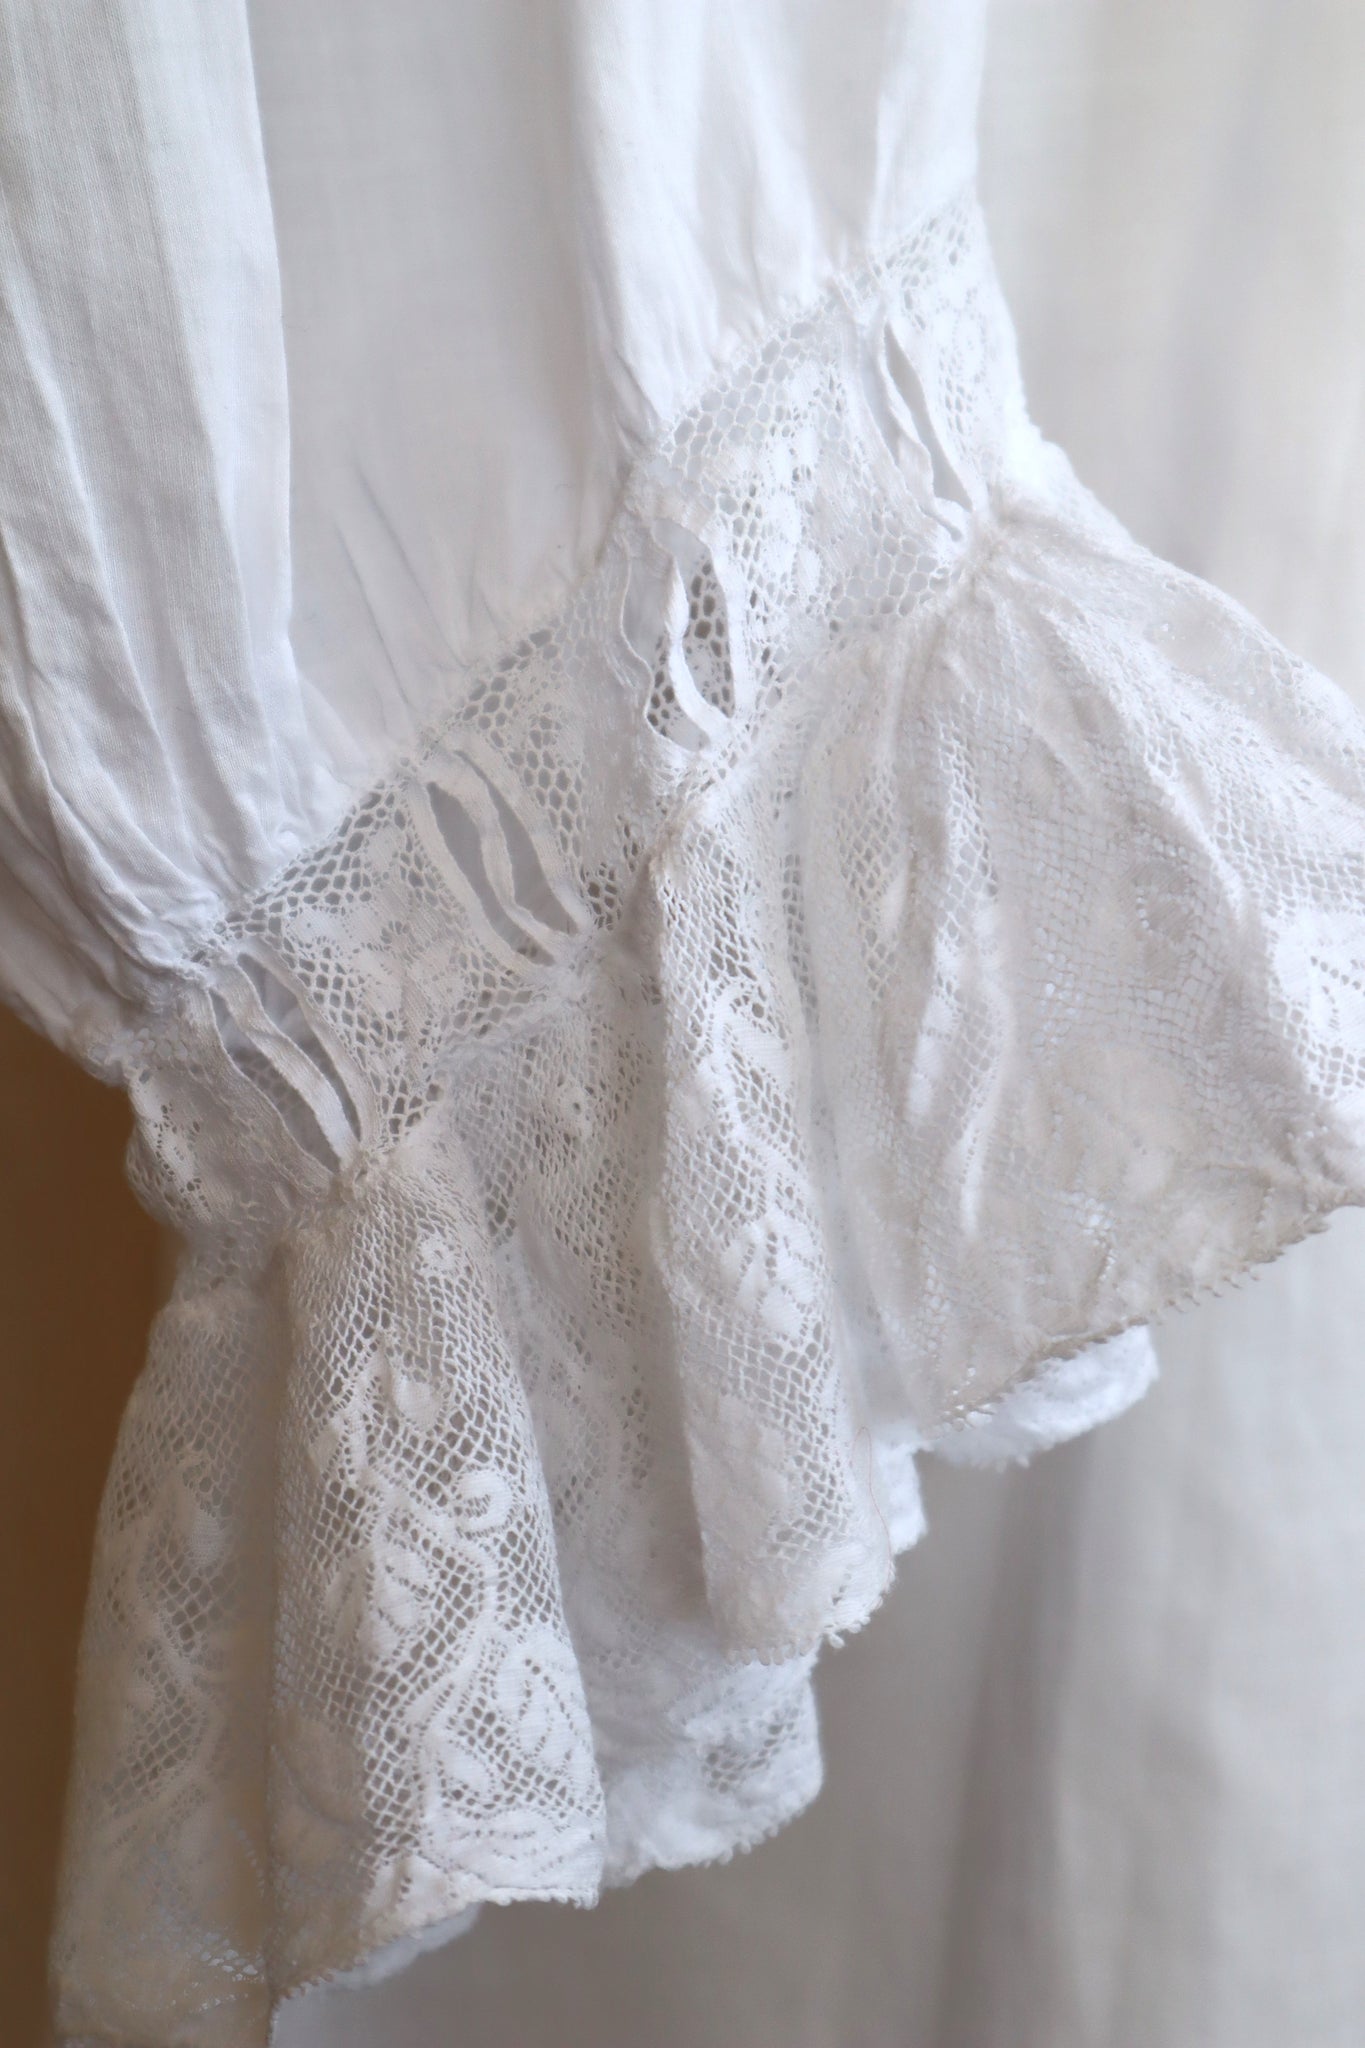 1900s All Hand Sewn Fluffy Lace Collar Dress